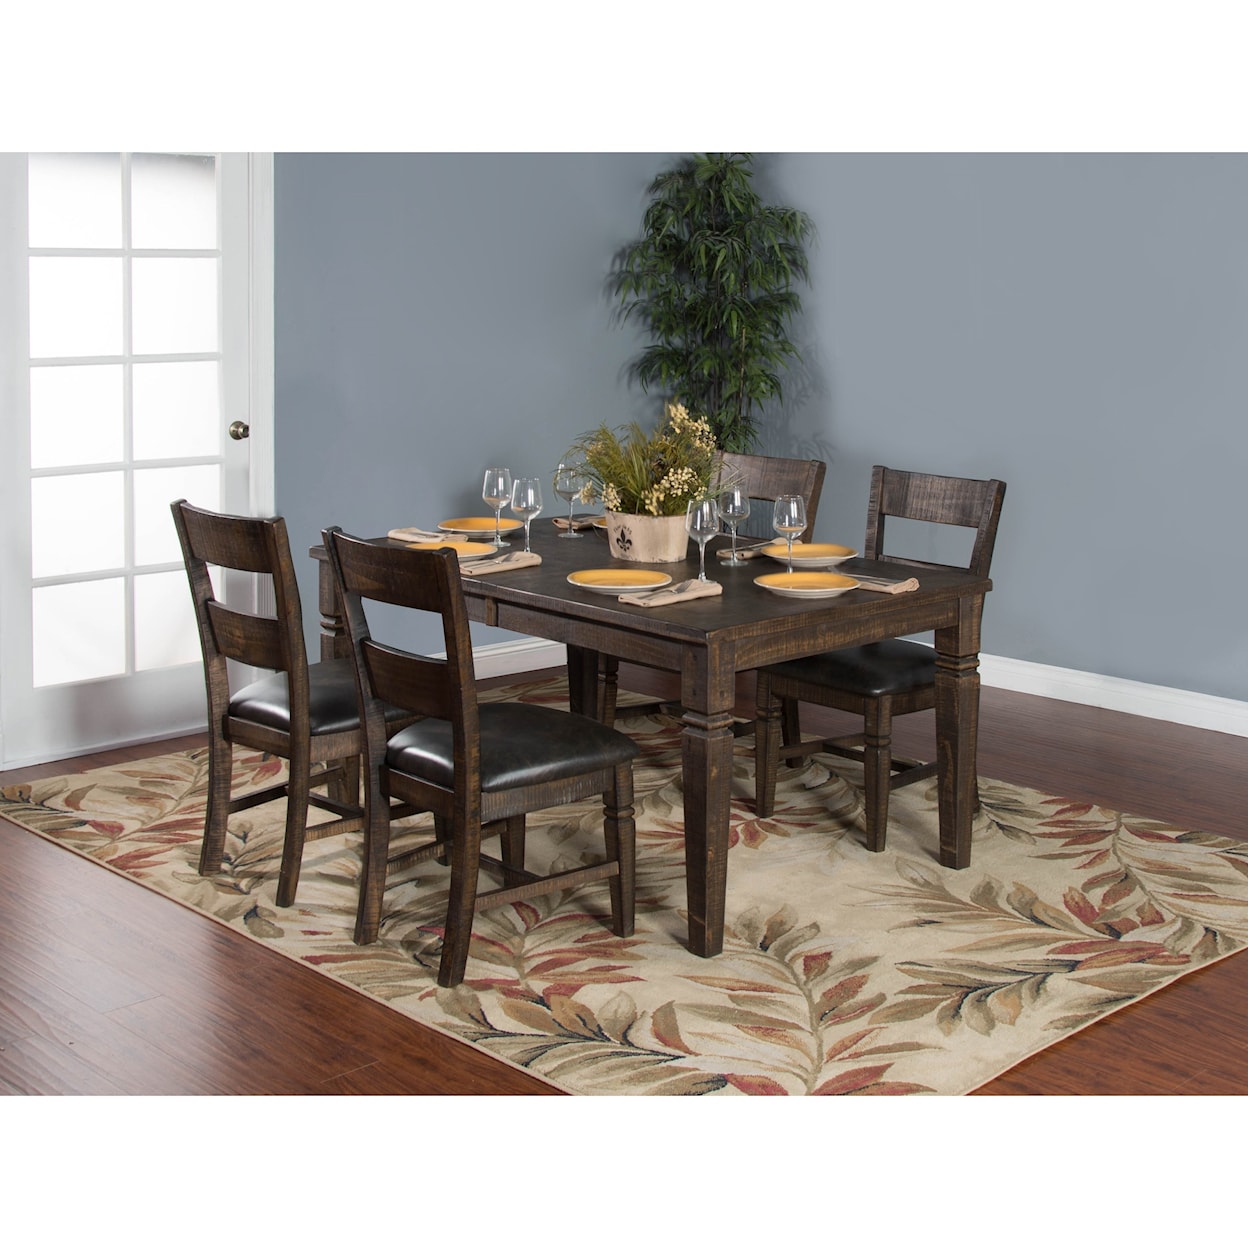 Sunny Designs Homestead Extension Dining Table